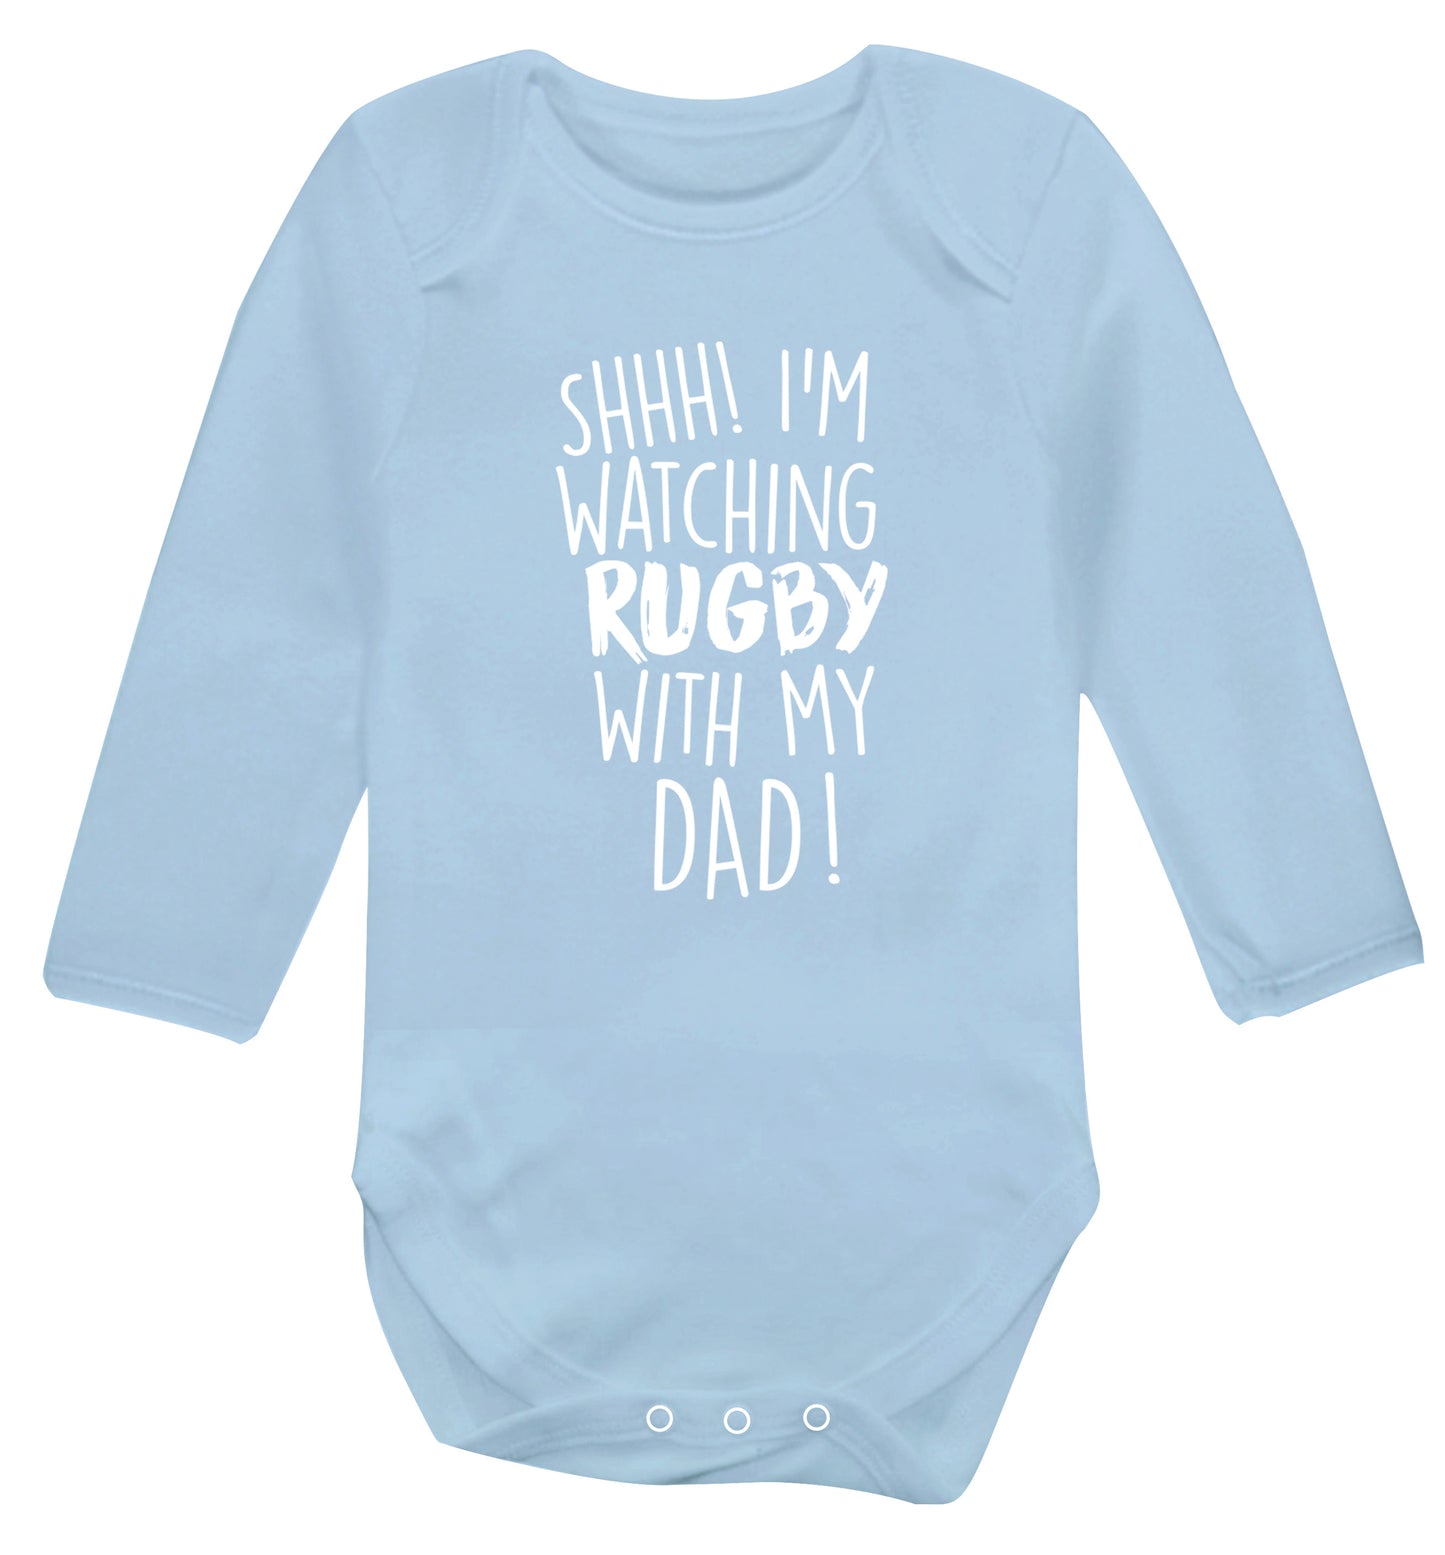 Shh... I'm watching rugby with my dad Baby Vest long sleeved pale blue 6-12 months